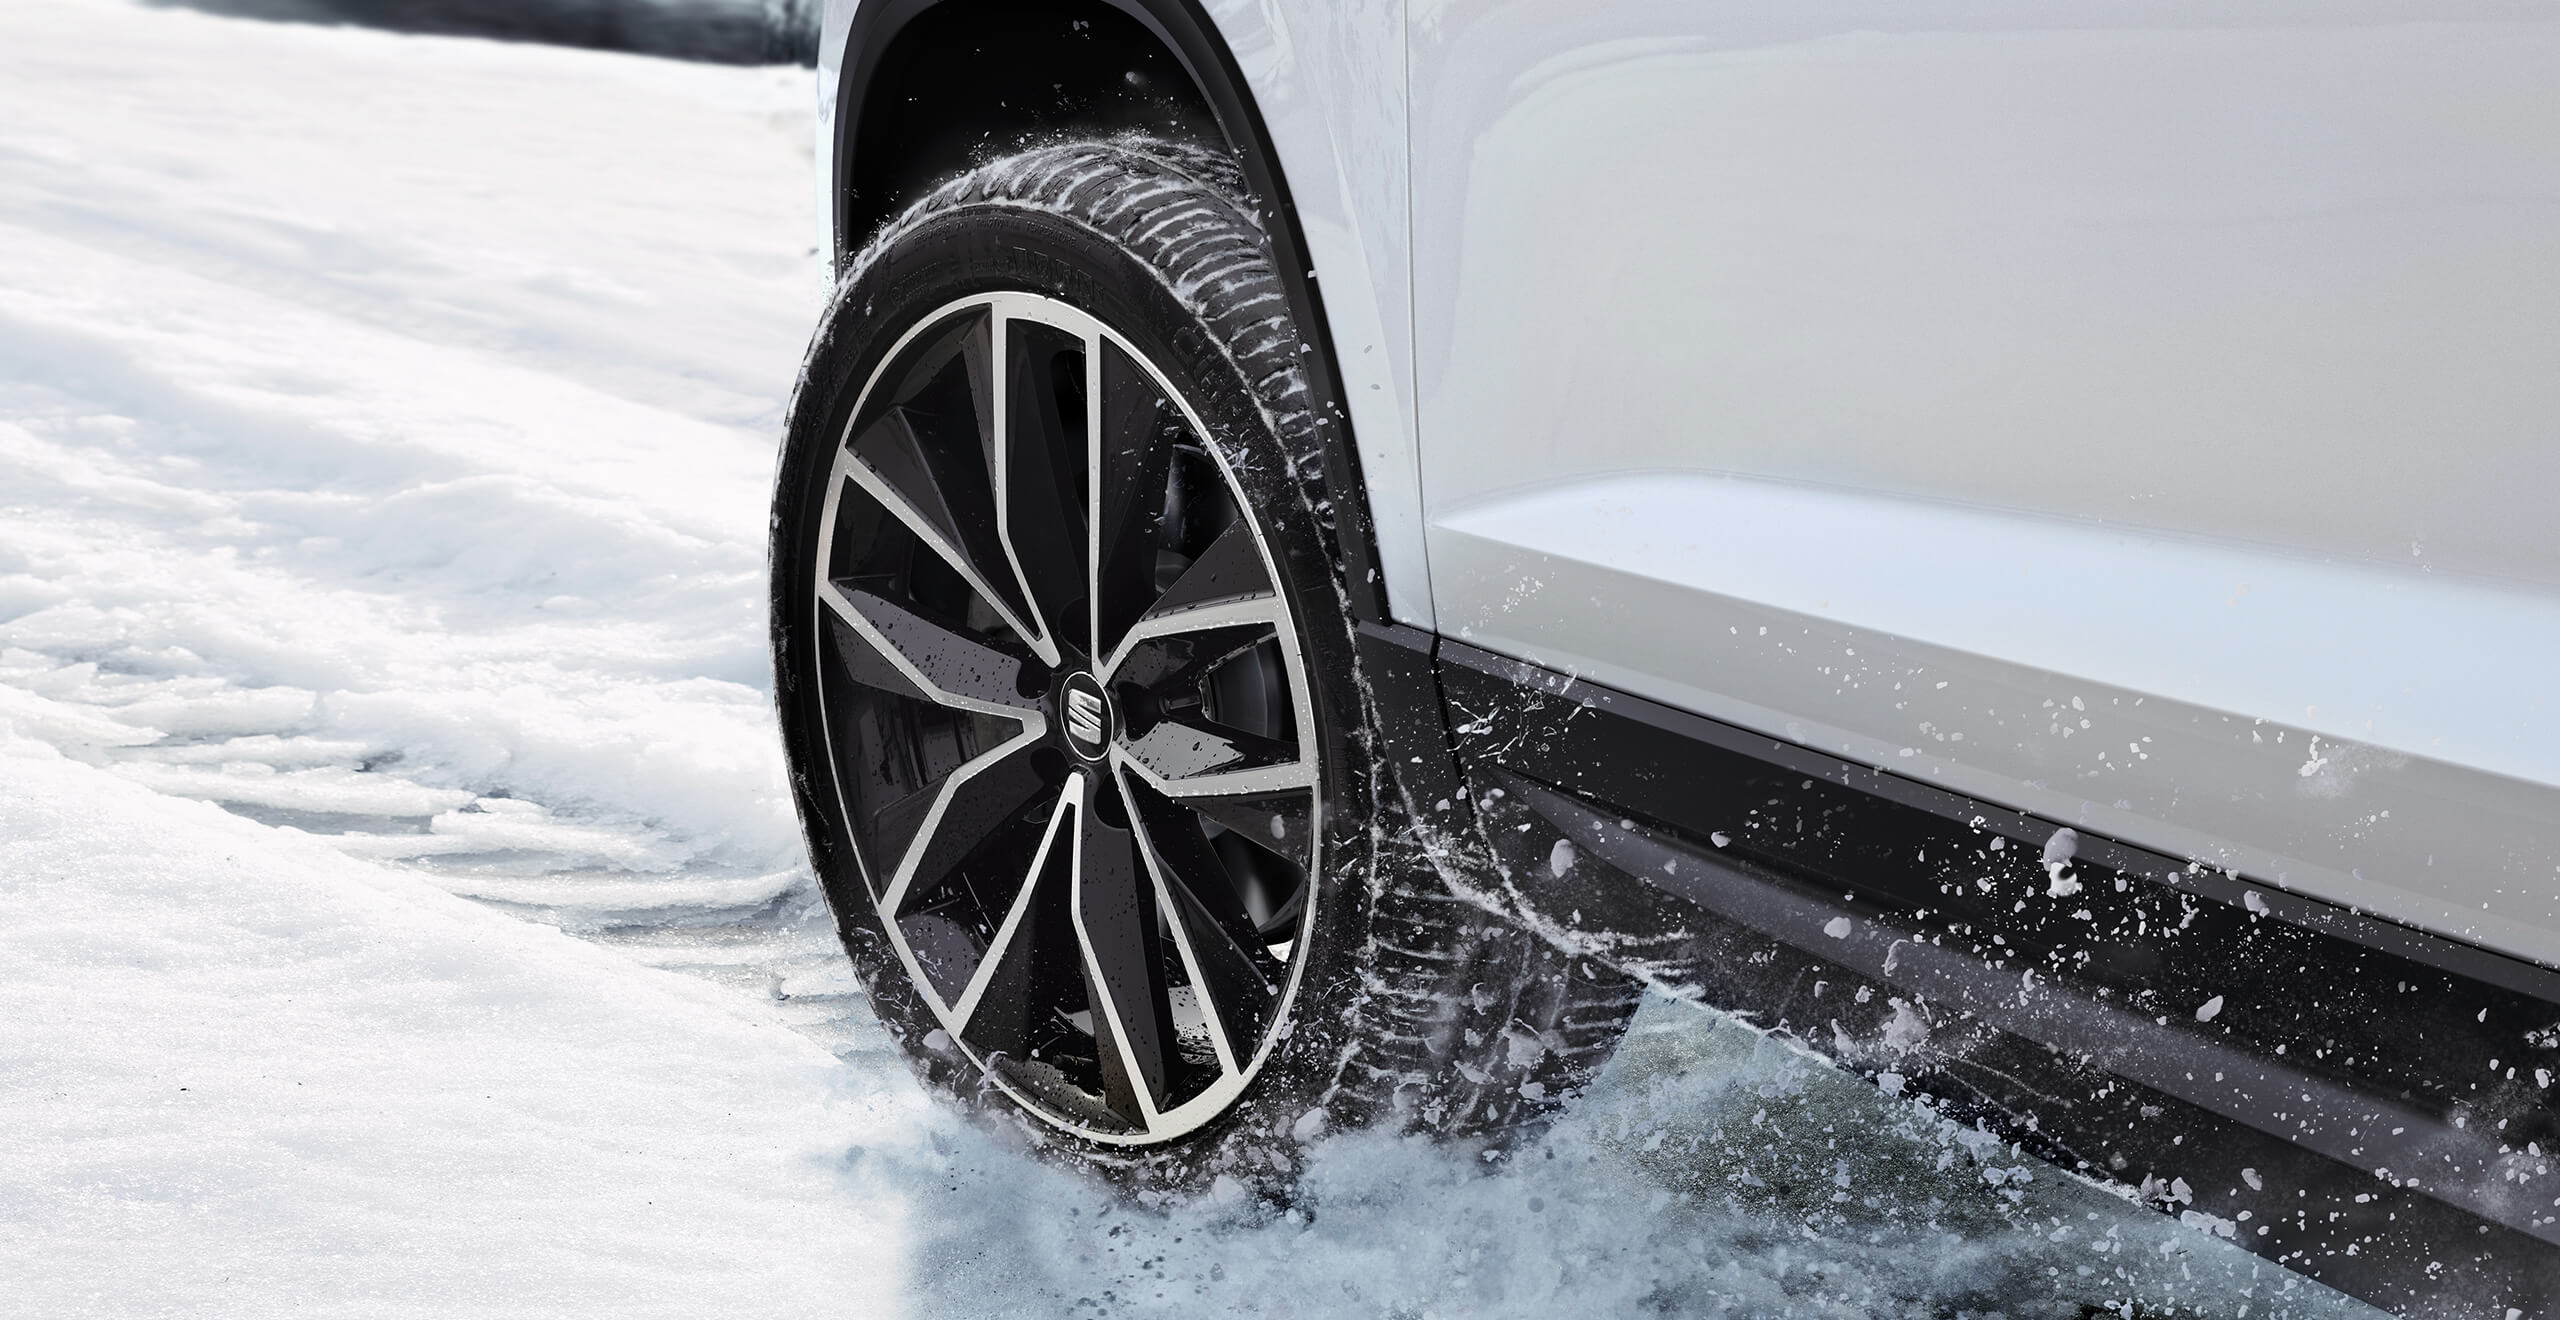 Showing a SEAT Ateca car wheel driving on a snowy road. Safe driving and control shows driving with SEAT Ateca 4Drive all-wheel drive system version